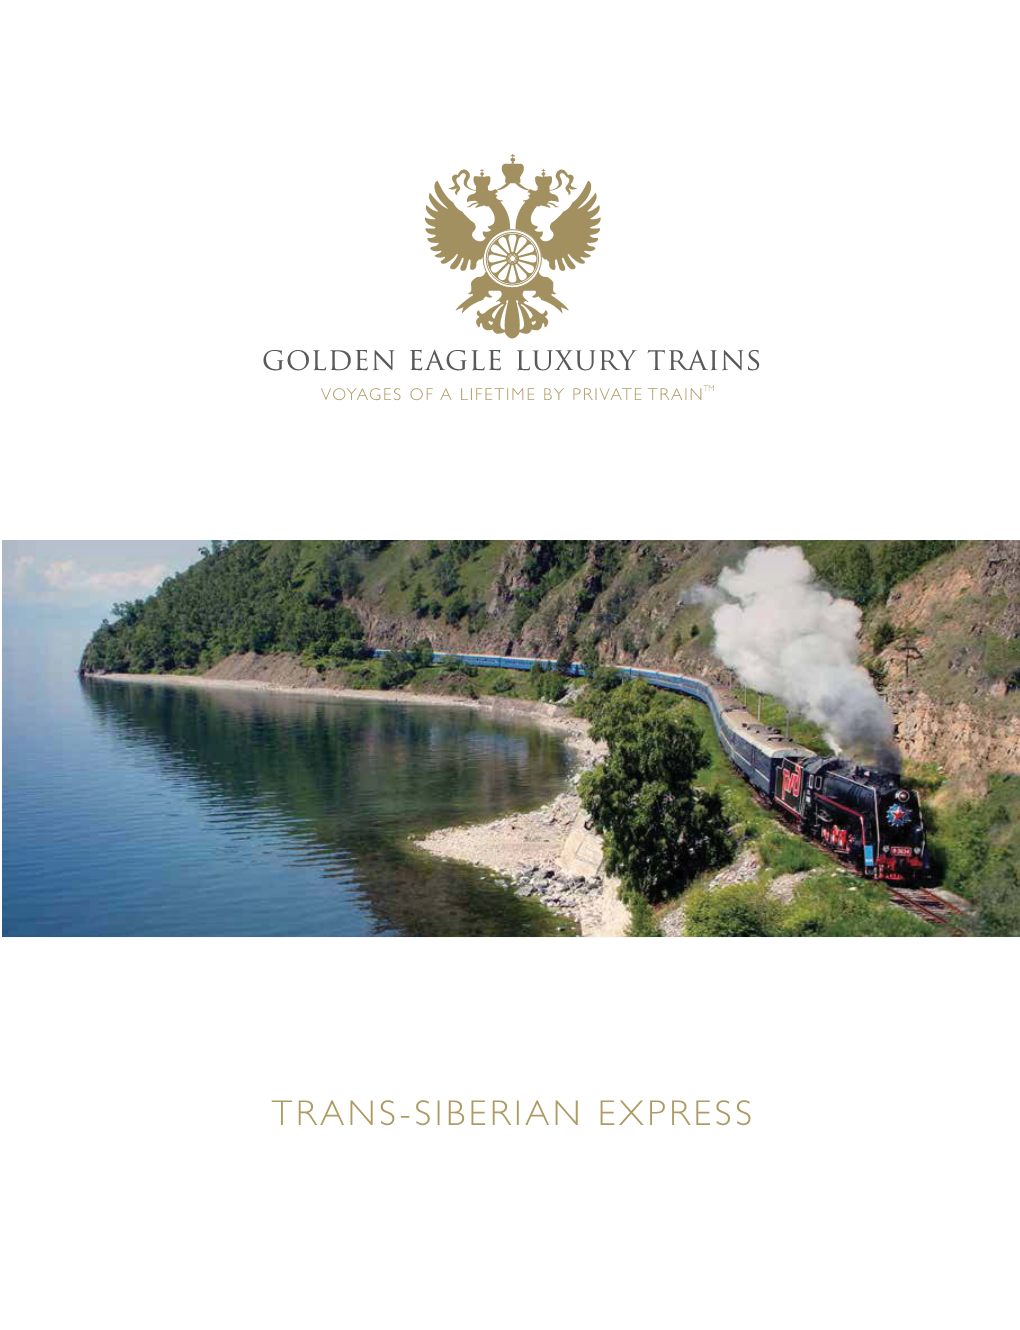 TRANS-SIBERIAN EXPRESS As Eric Newby in His 1977 Book the Big Red Train Ride Succinctly Stated, ‘ the Trans-Siberian Is the Big Train Ride.’